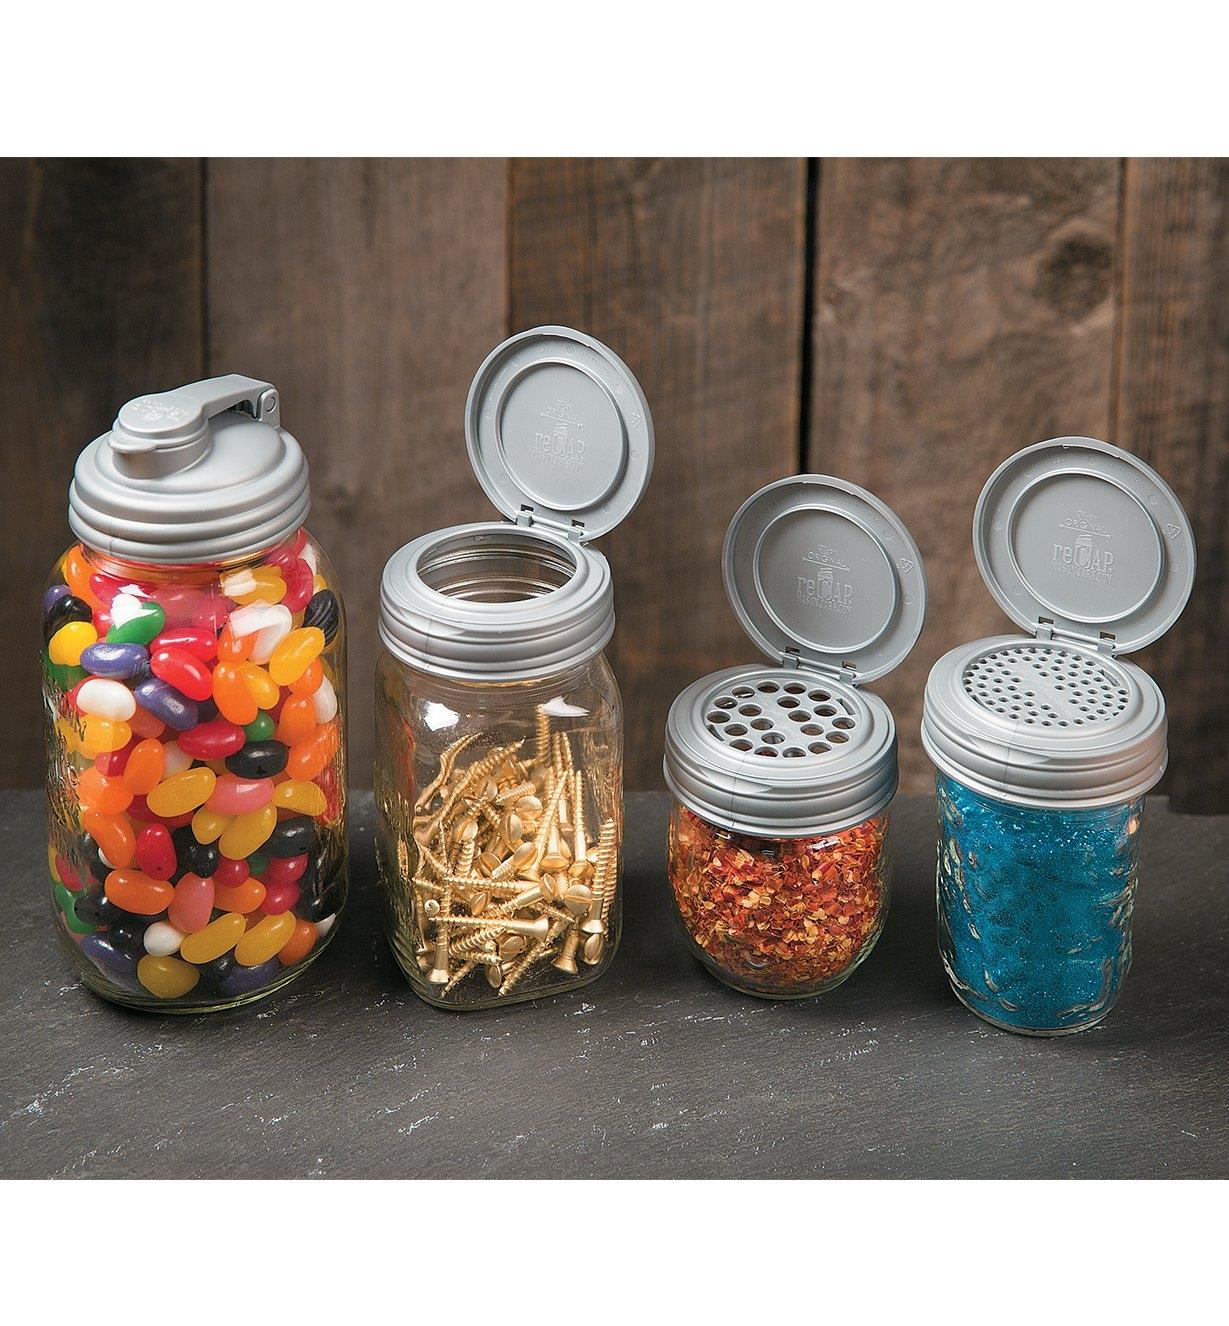 Canning Jar Caps on jars filled with jelly beans, screws, and spices